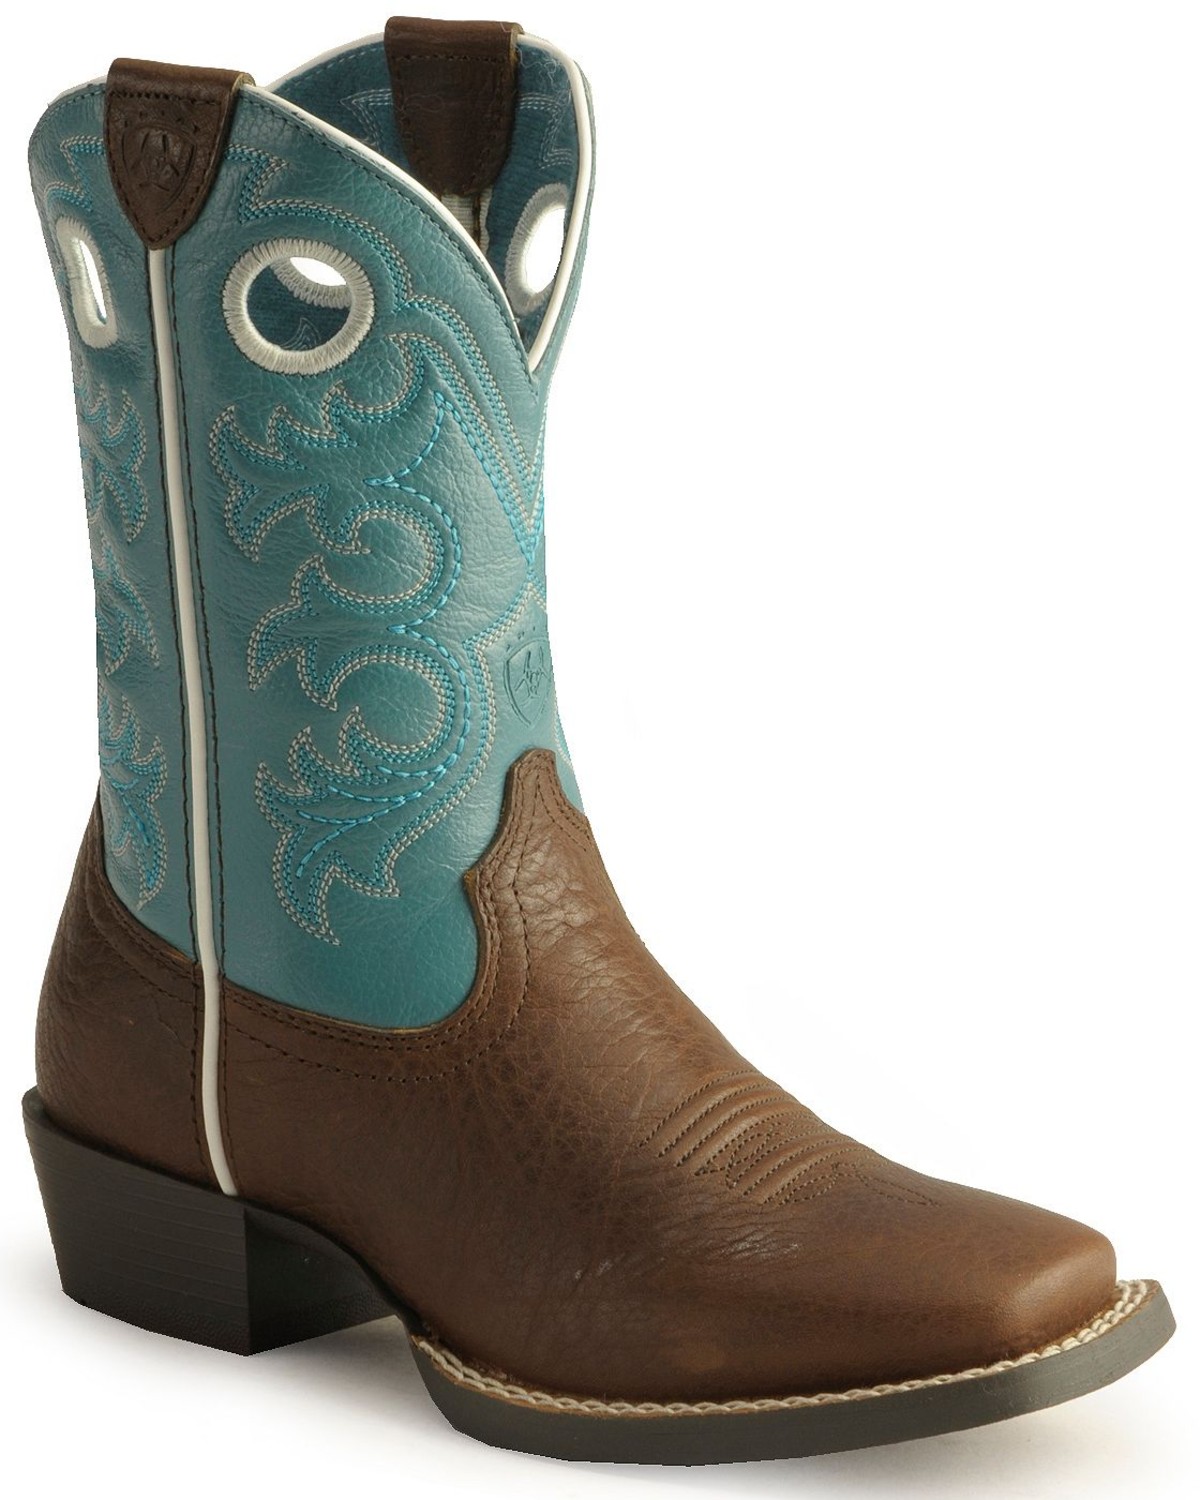 Ariat Youth Boys' Crossfire Cowboy Boots - Square Toe | Sheplers